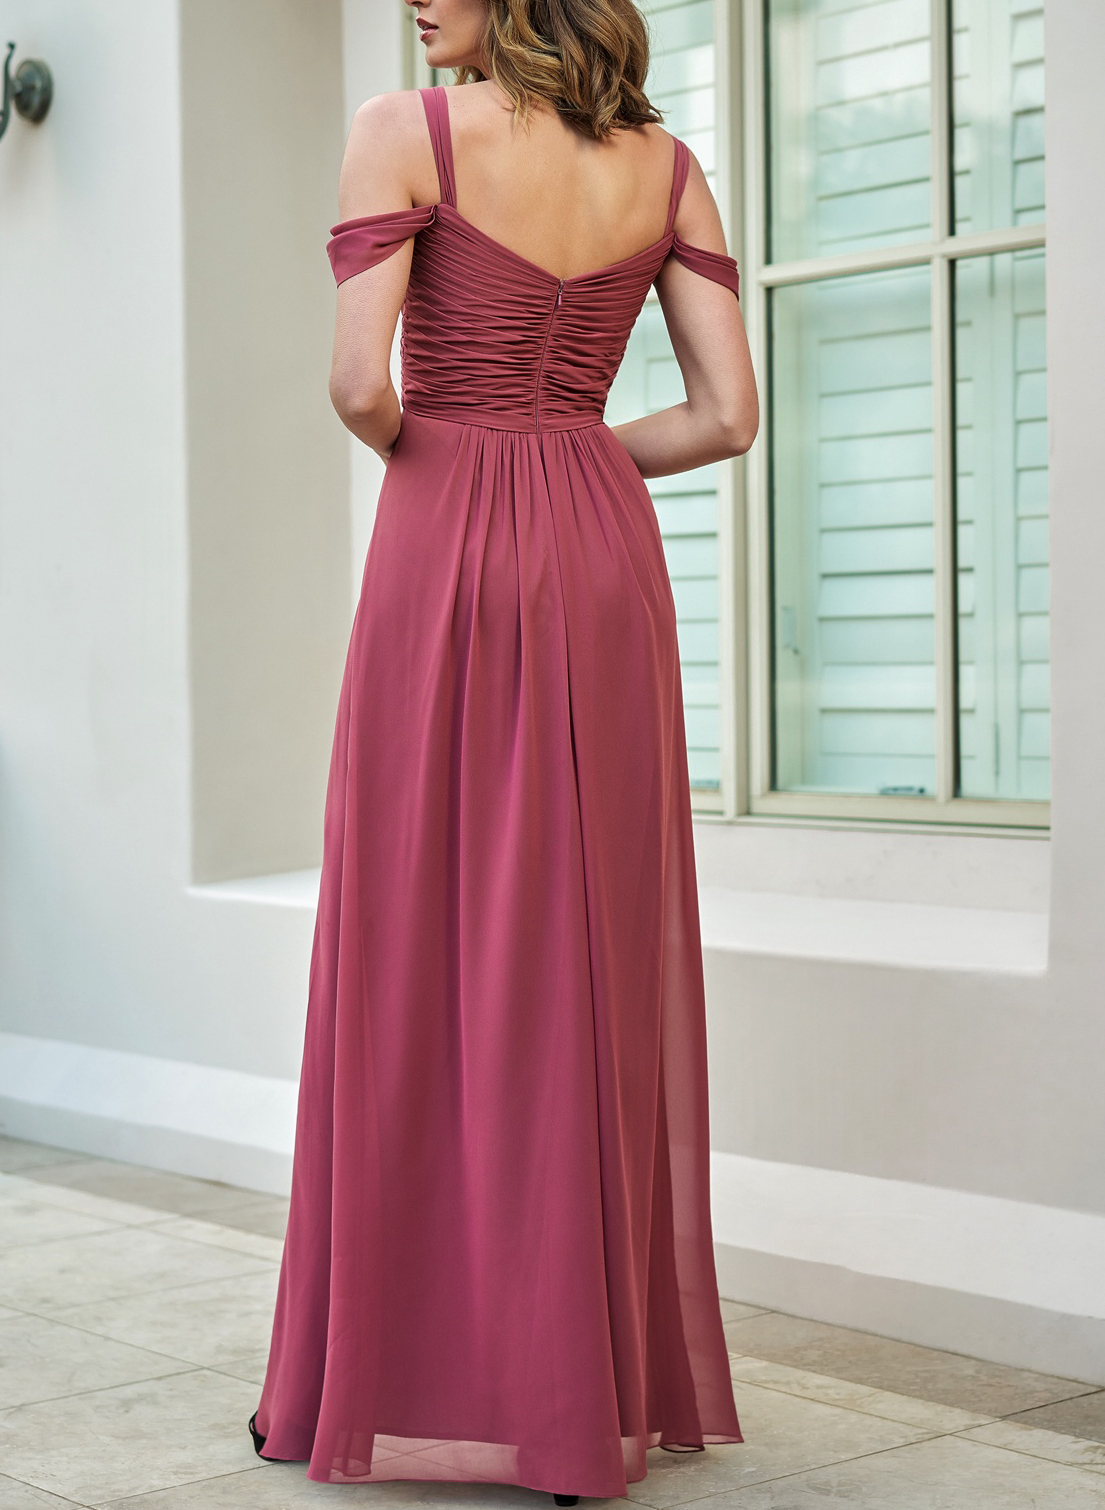 Cold Neckline A-Line Bridesmaid Dresses With Ruffle